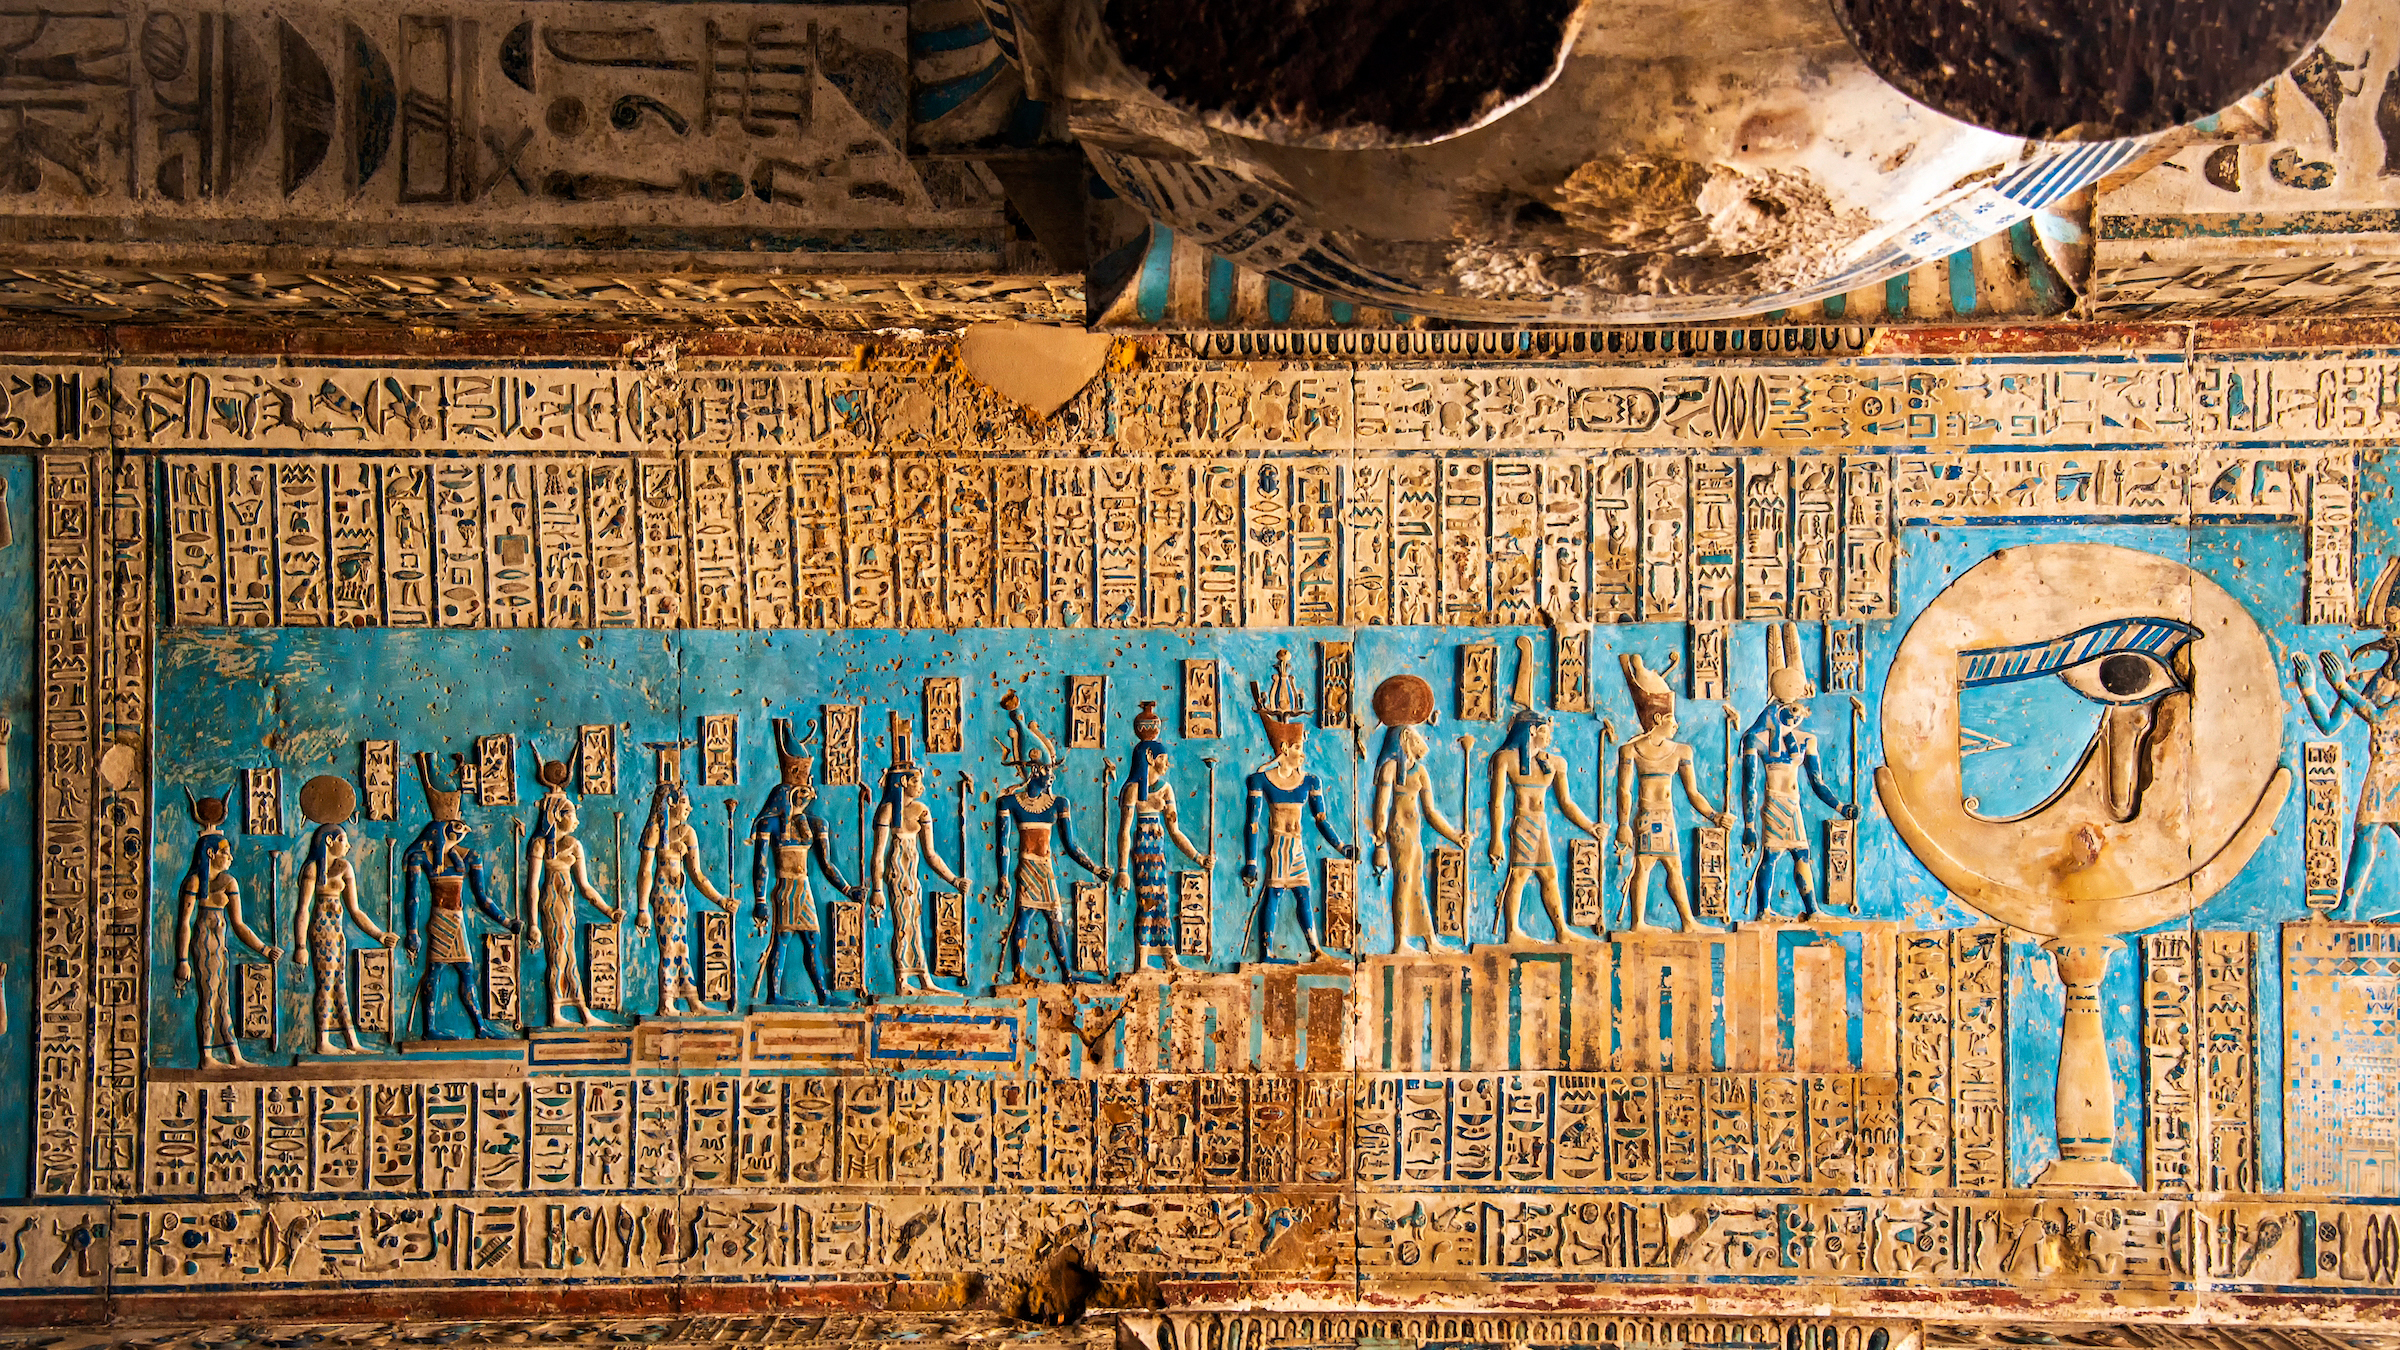 Ancient Egyptian hieroglyphs on the ceiling of Hypostyle Hall within the Temple of Hathor in Egypt.